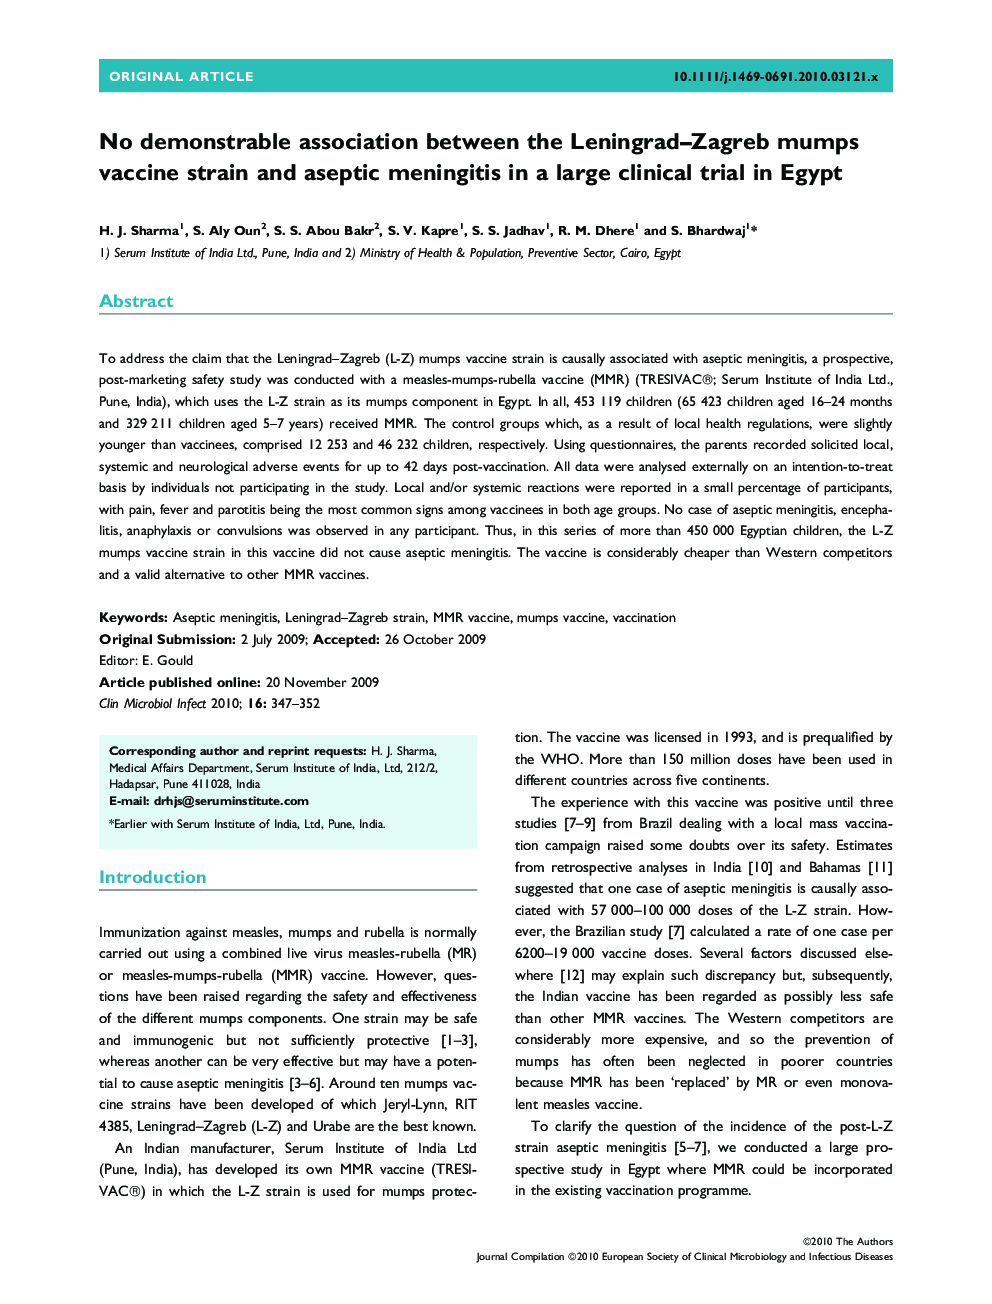 No demonstrable association between the Leningrad–Zagreb mumps vaccine strain and aseptic meningitis in a large clinical trial in Egypt 